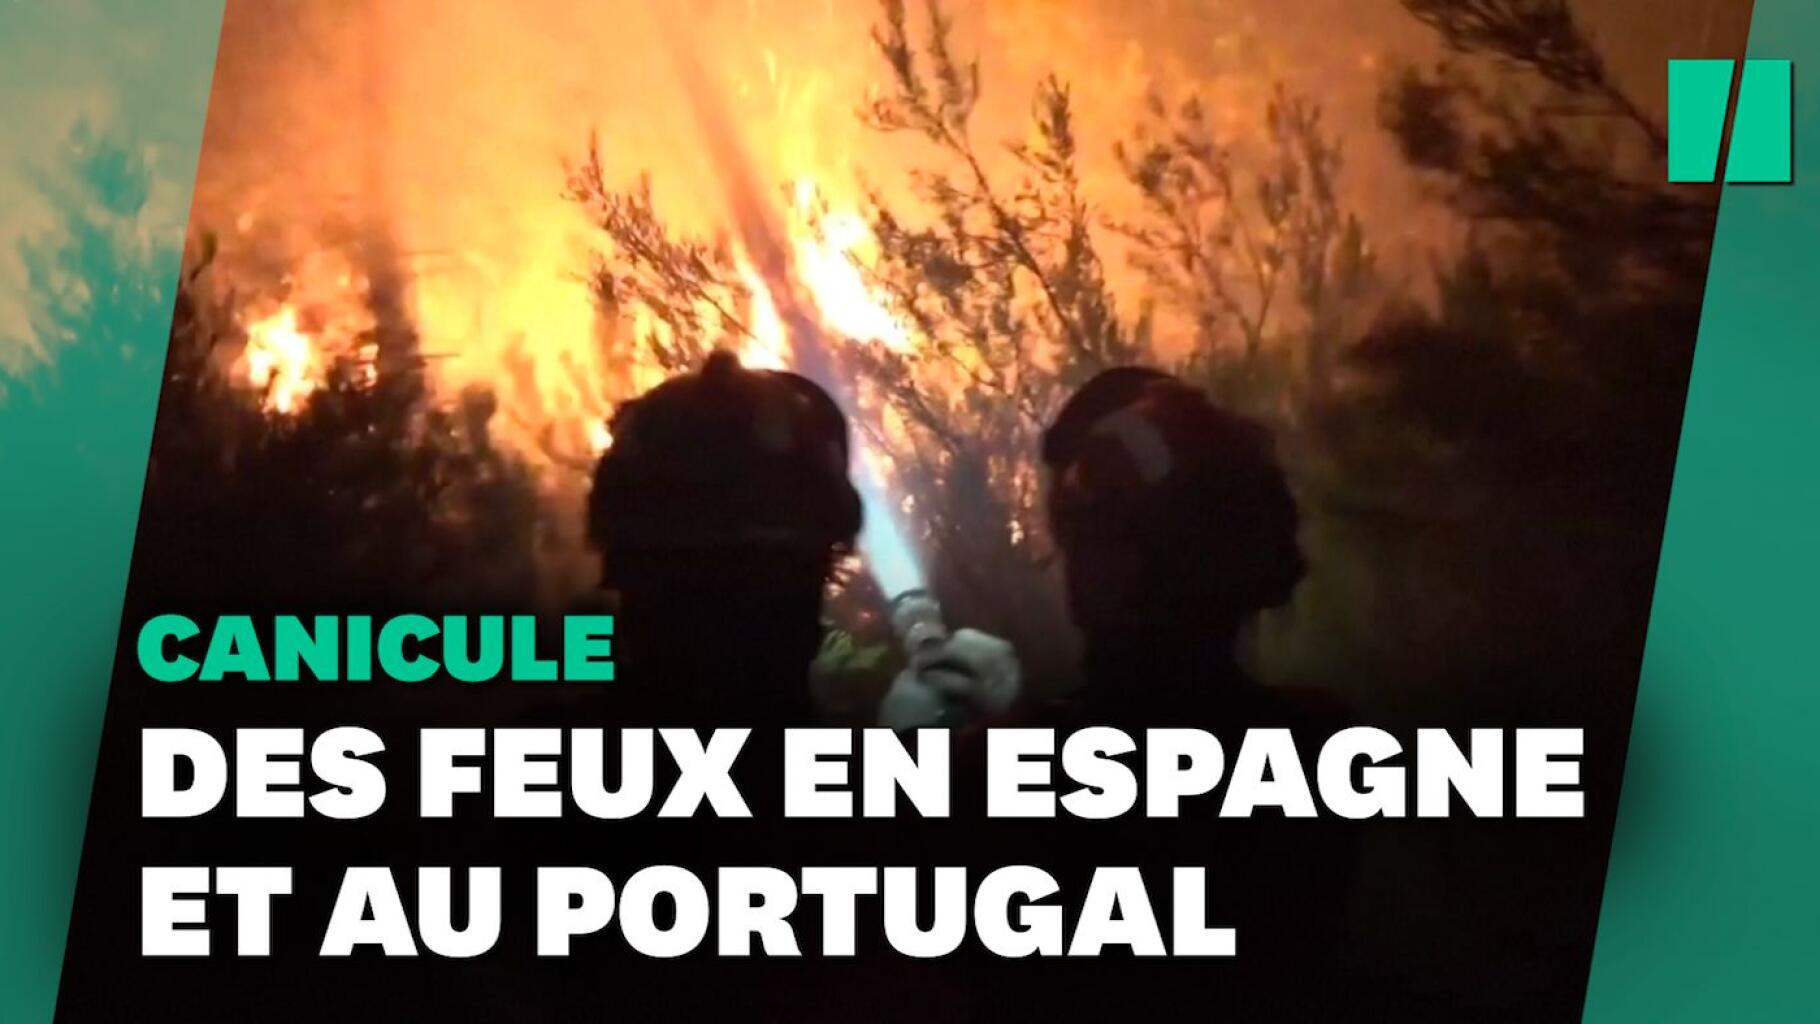 Fires and a heat wave also hit Spain and Portugal